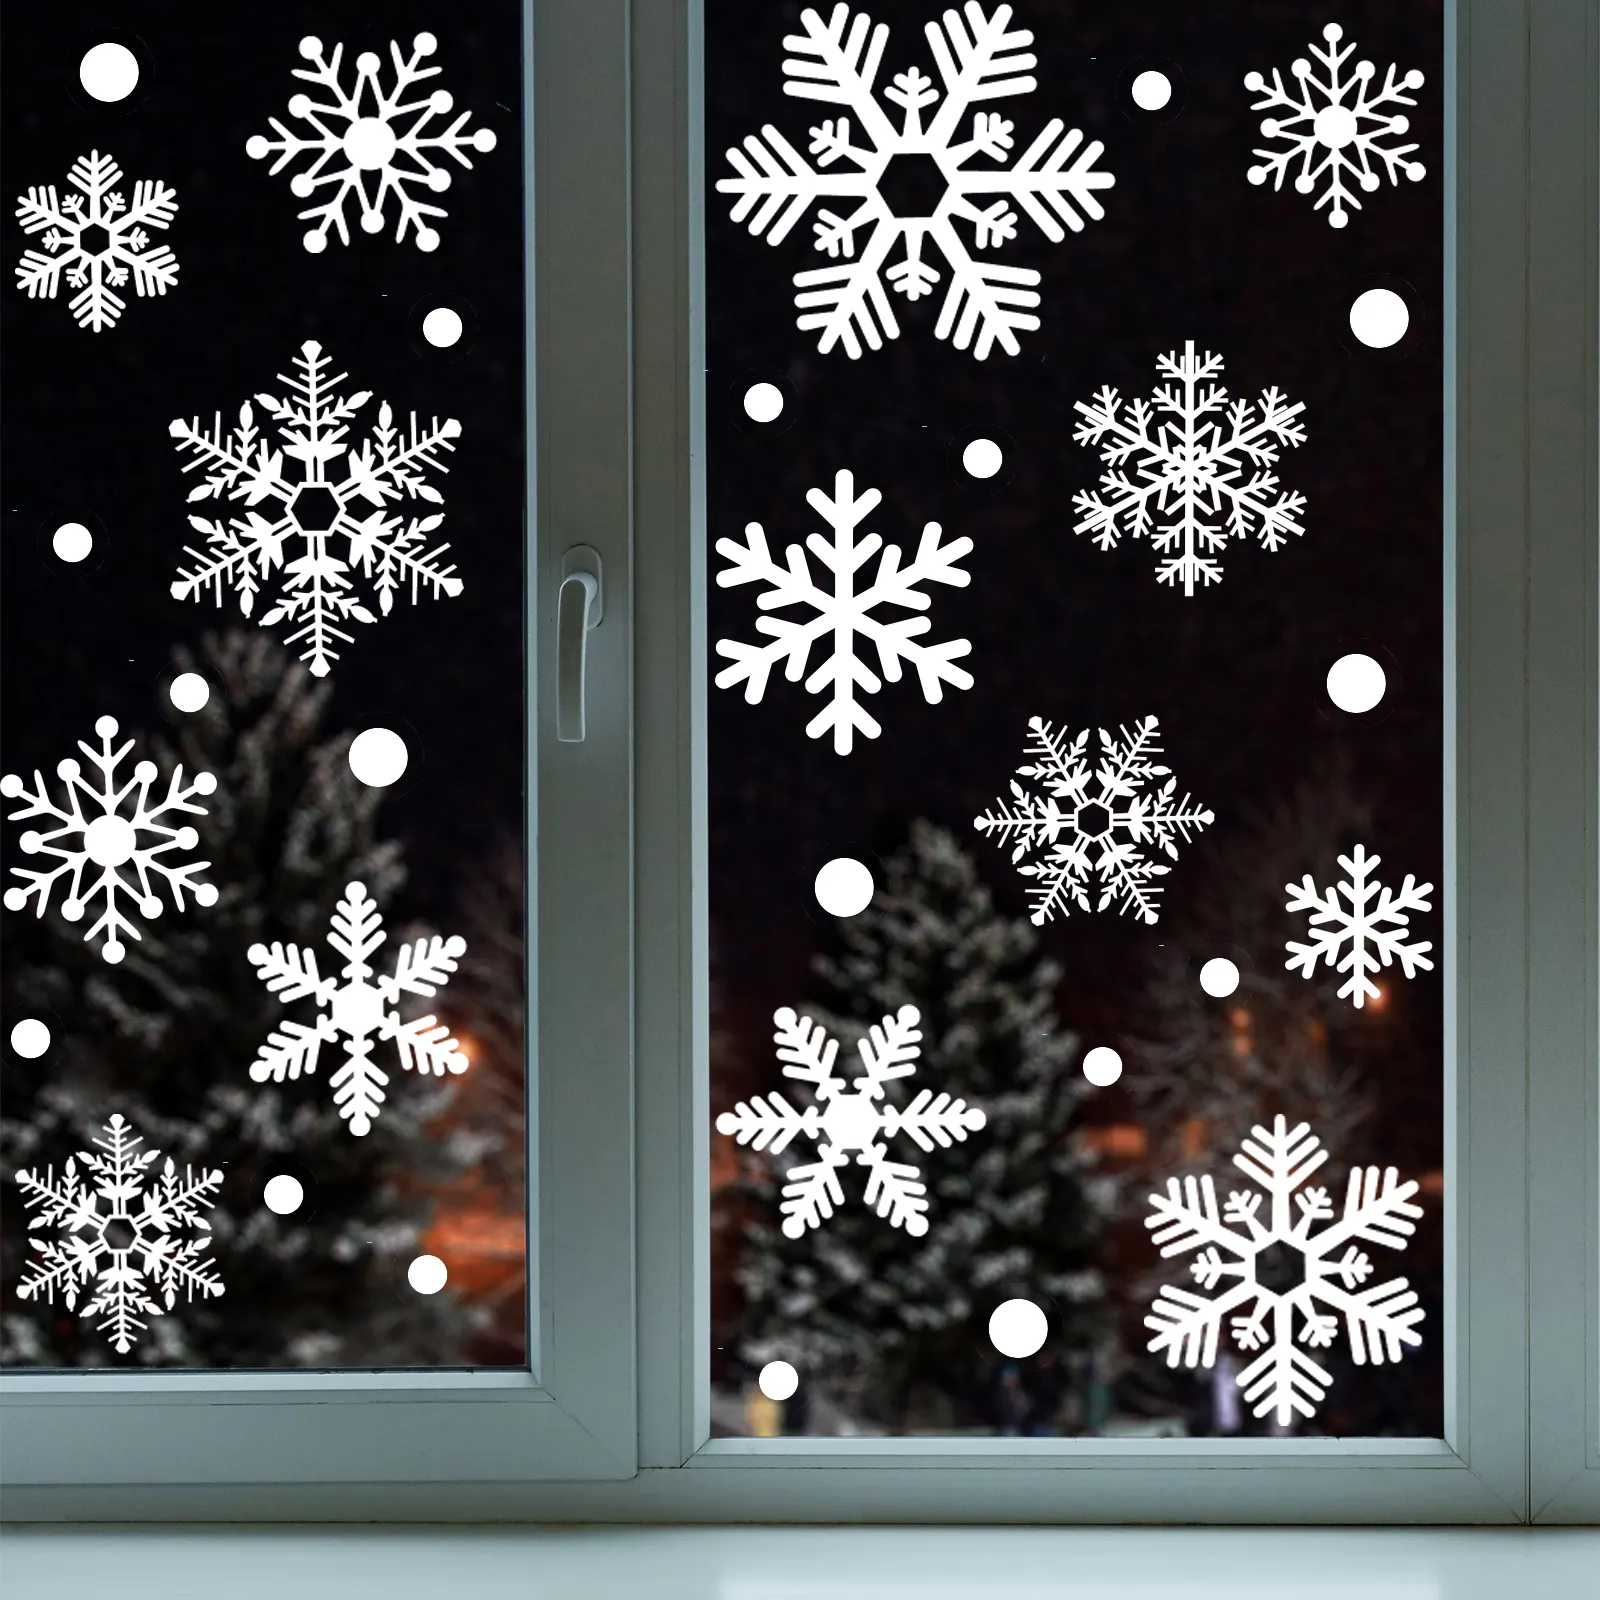 Christmas White Snowflakes Window Clings Decal Stickers Ornaments for Winter Frozen New Year Party Wonderland Decorations